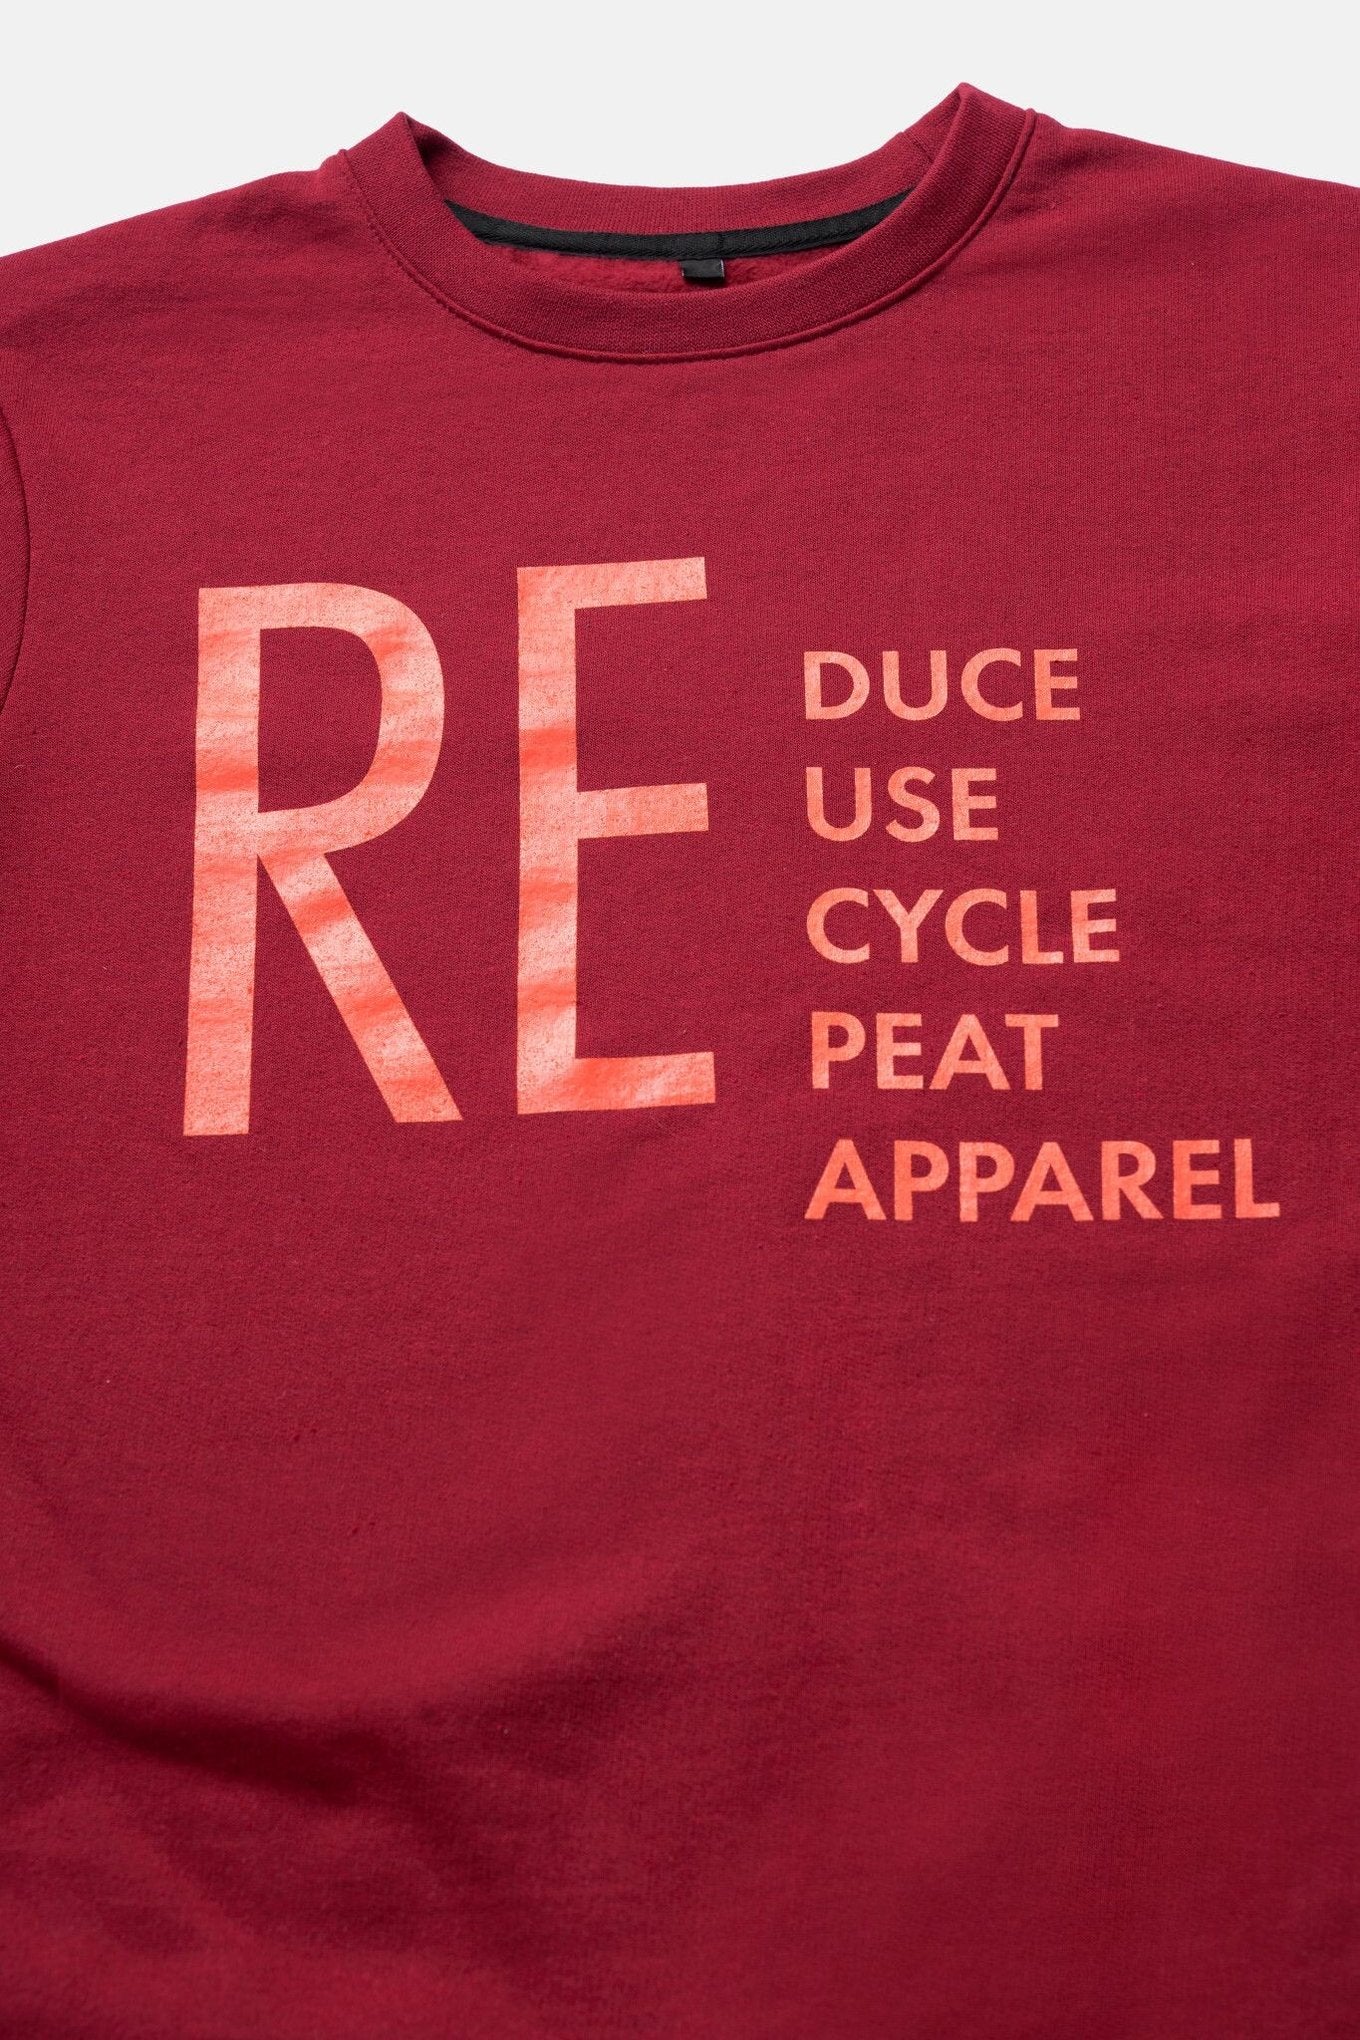 ReApparel ReApparel Crew Neck . in color Garnet and shape long sleeve